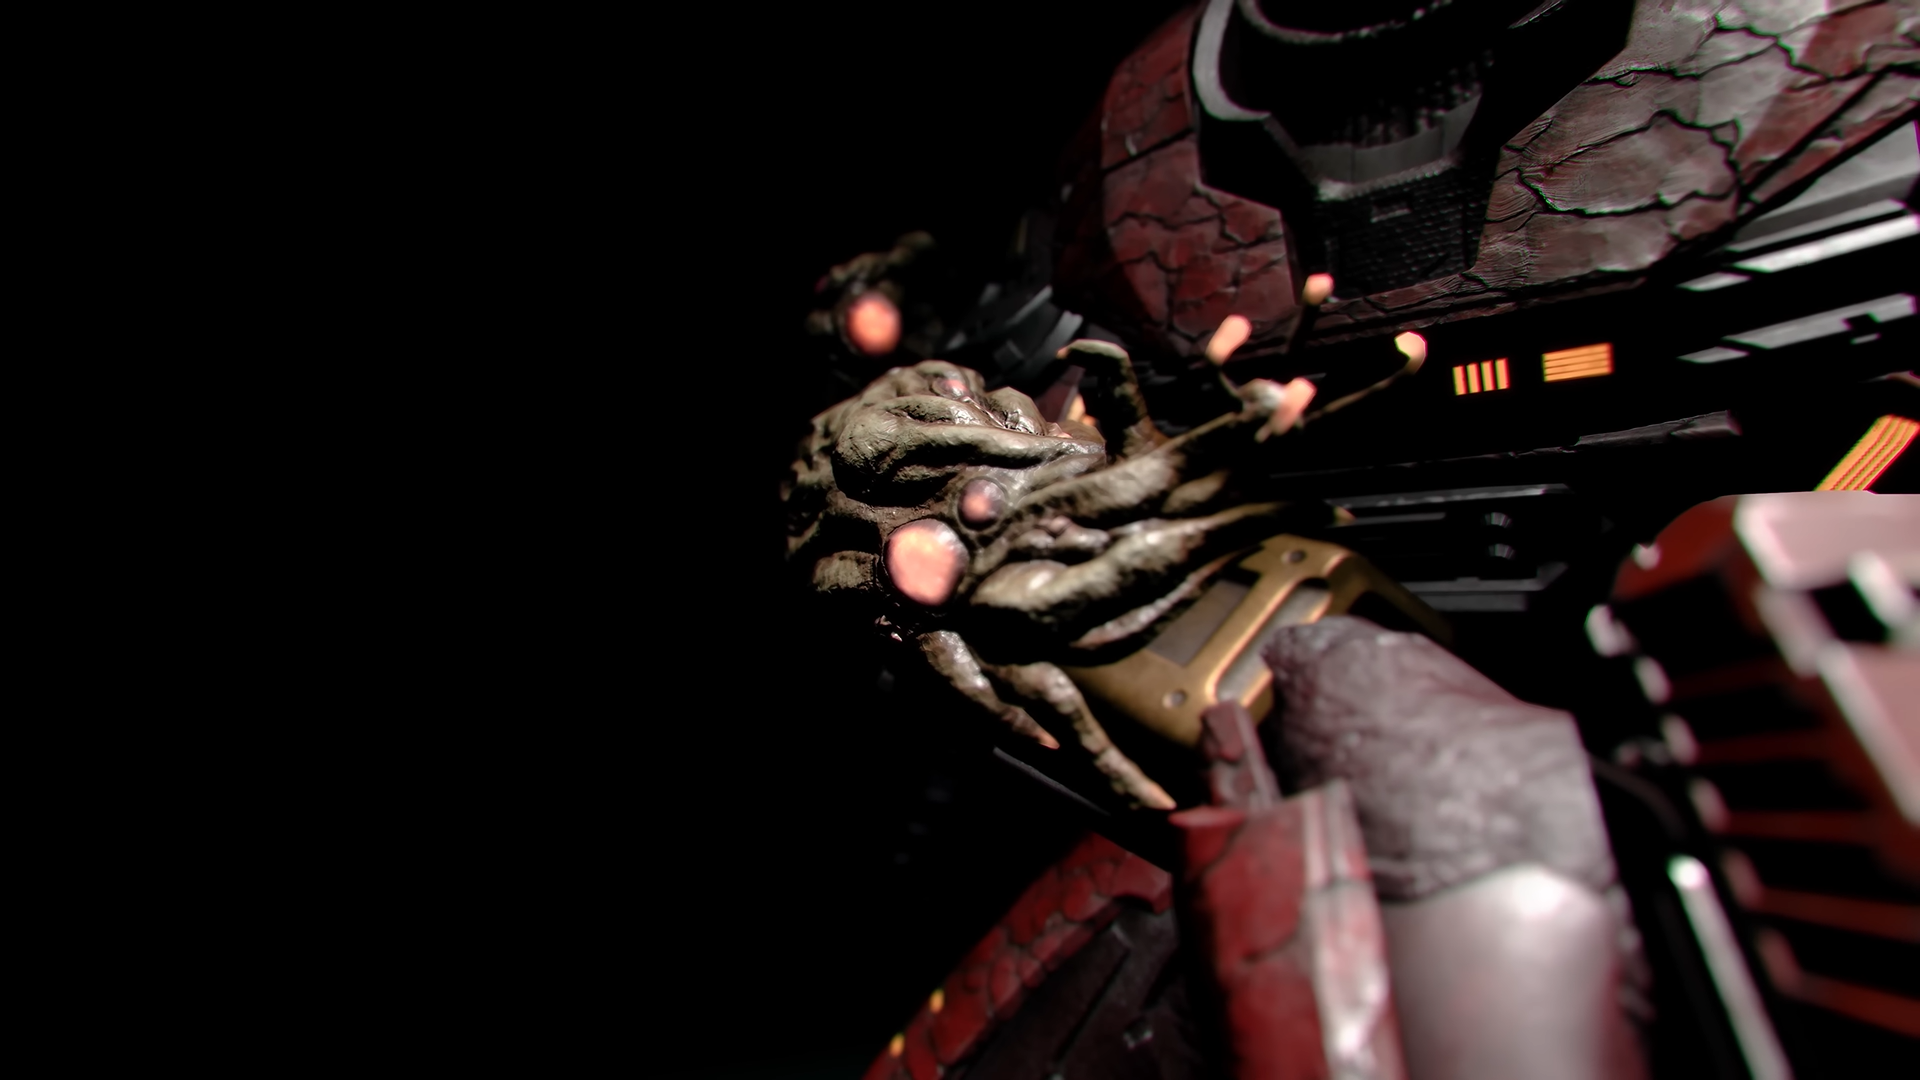 Halo Infinite image of a Flood-infected Spartan's wrist and chest